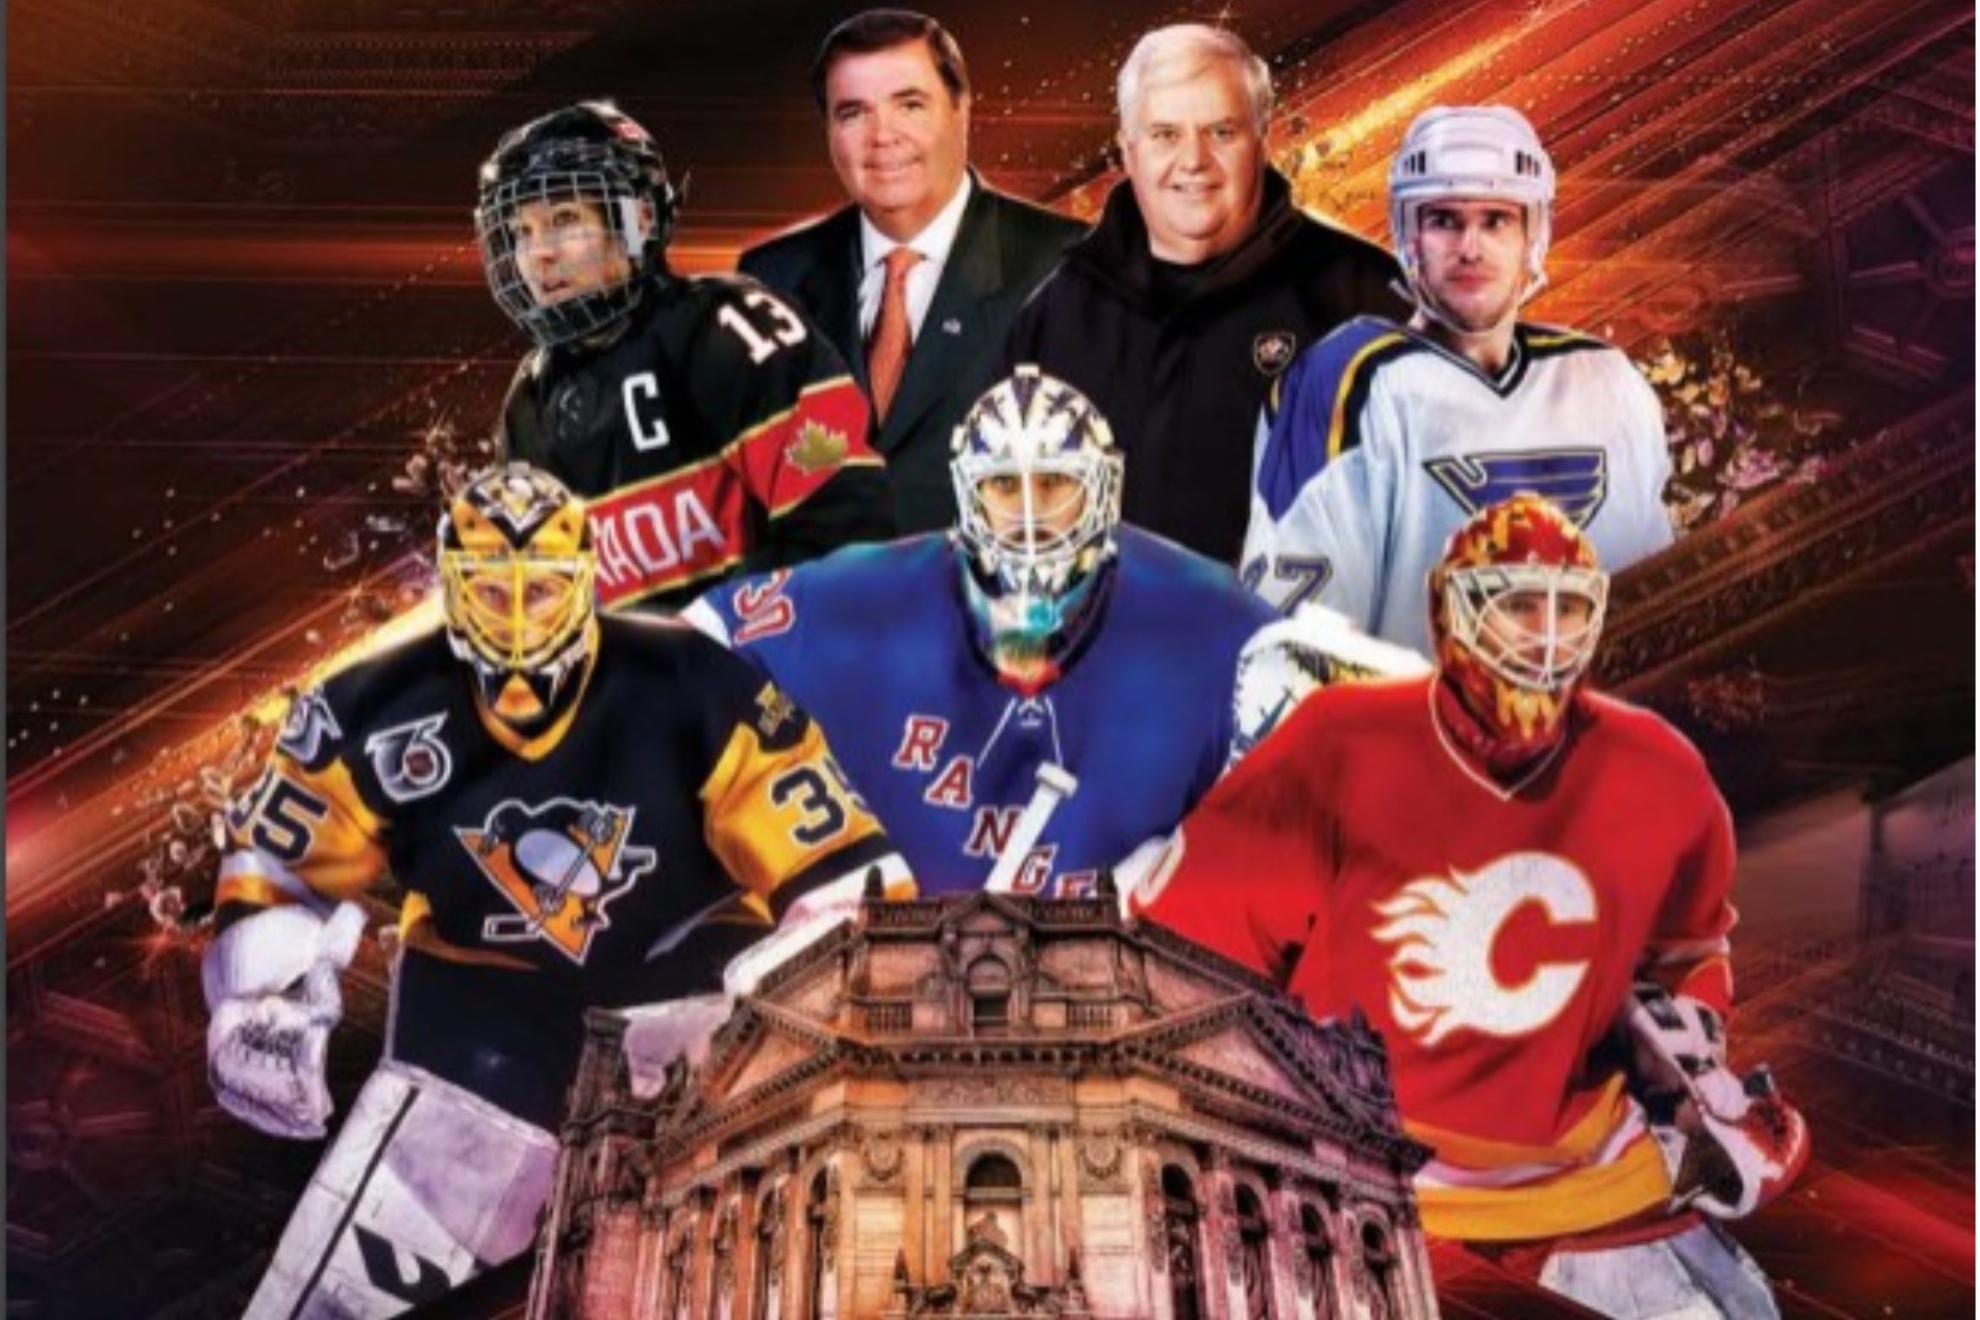 The Hockey Hall of Fame inductee ceremony will take place on November 13